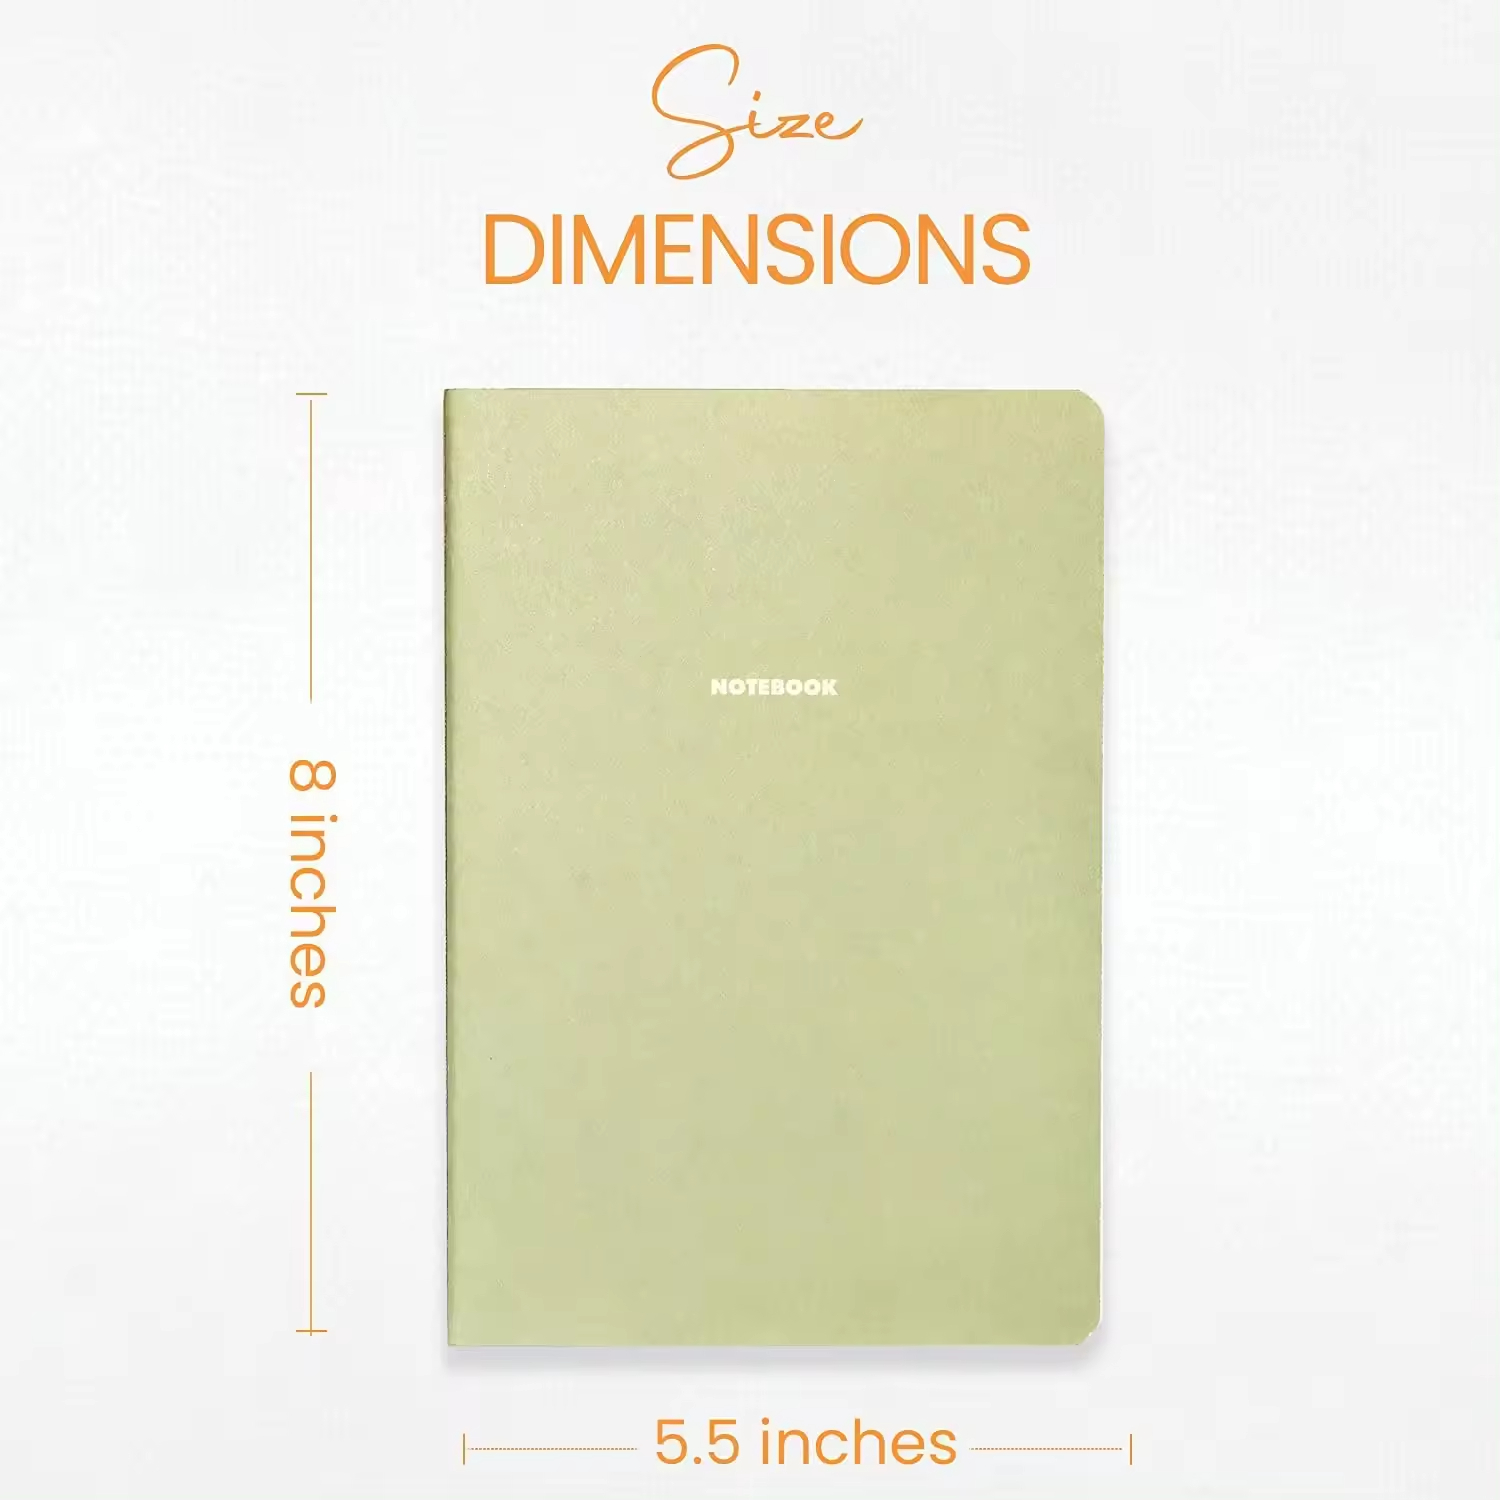 Custom A5 Cute Soft Paper Lined Diary Journal Notebook